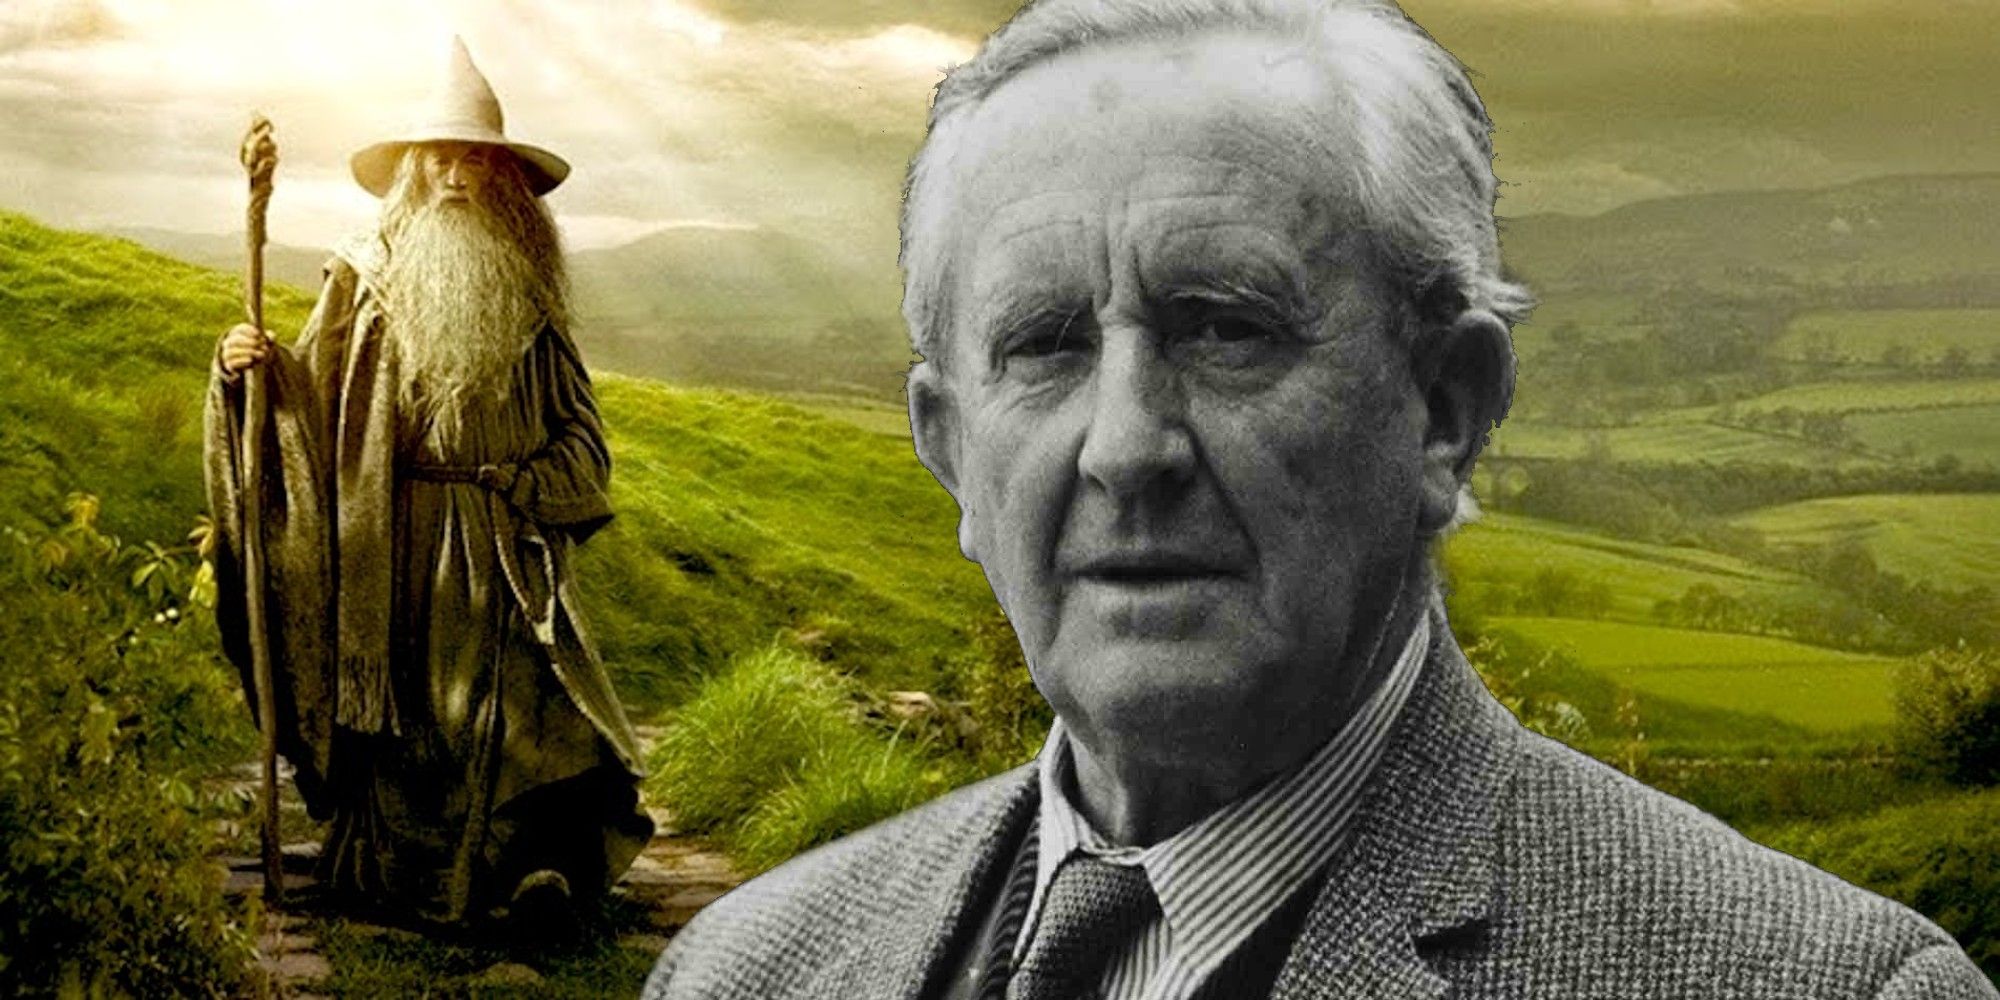 Unseen Lord of the Rings author's works and photos released